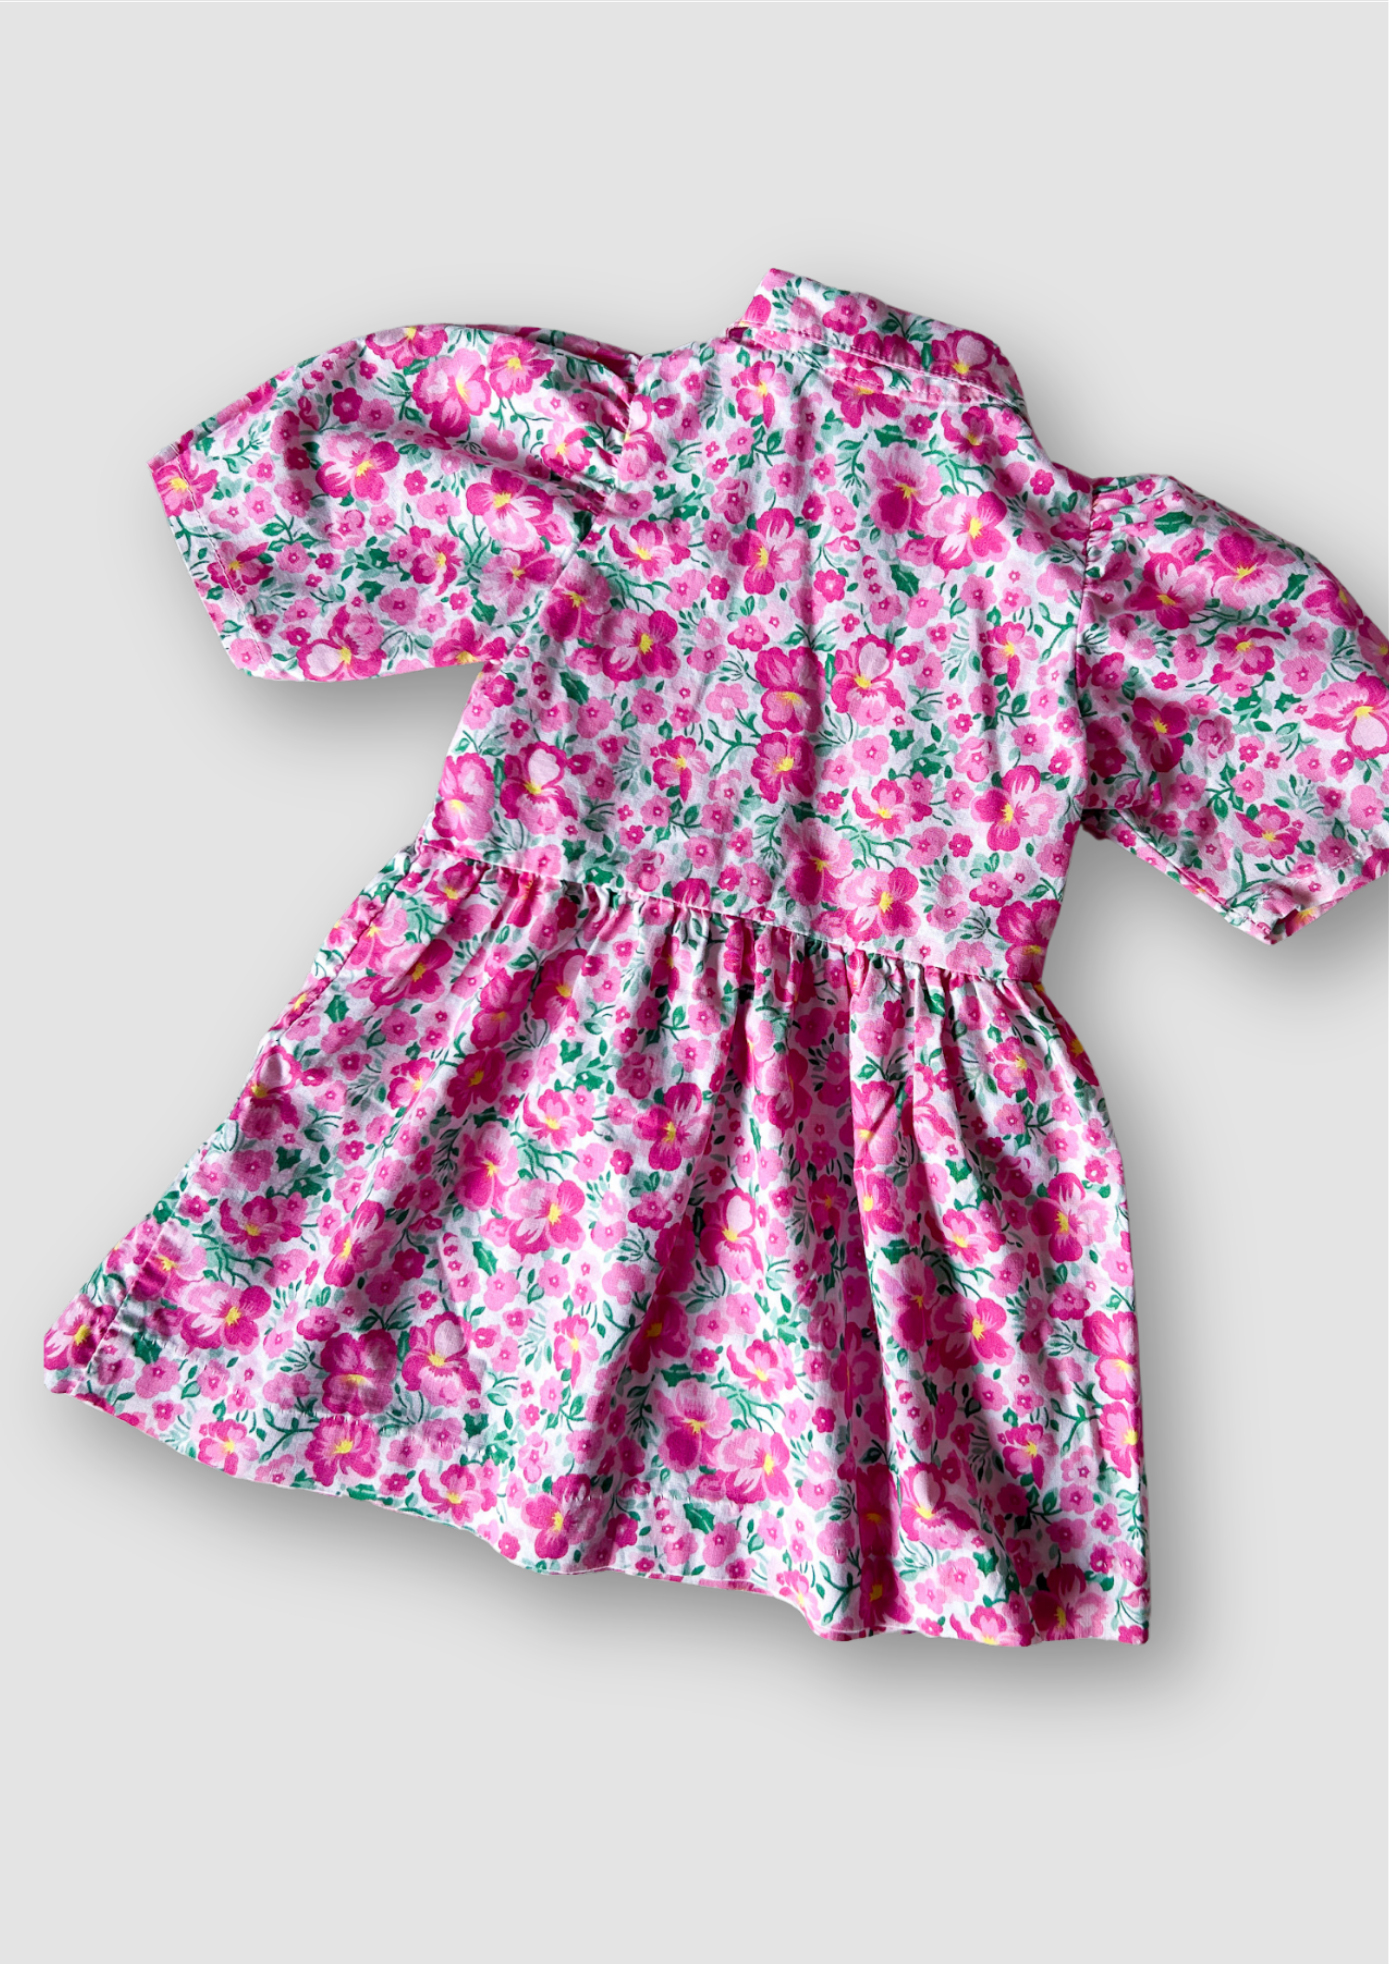 Vintage OshKosh Floral Dress, approx 3 years